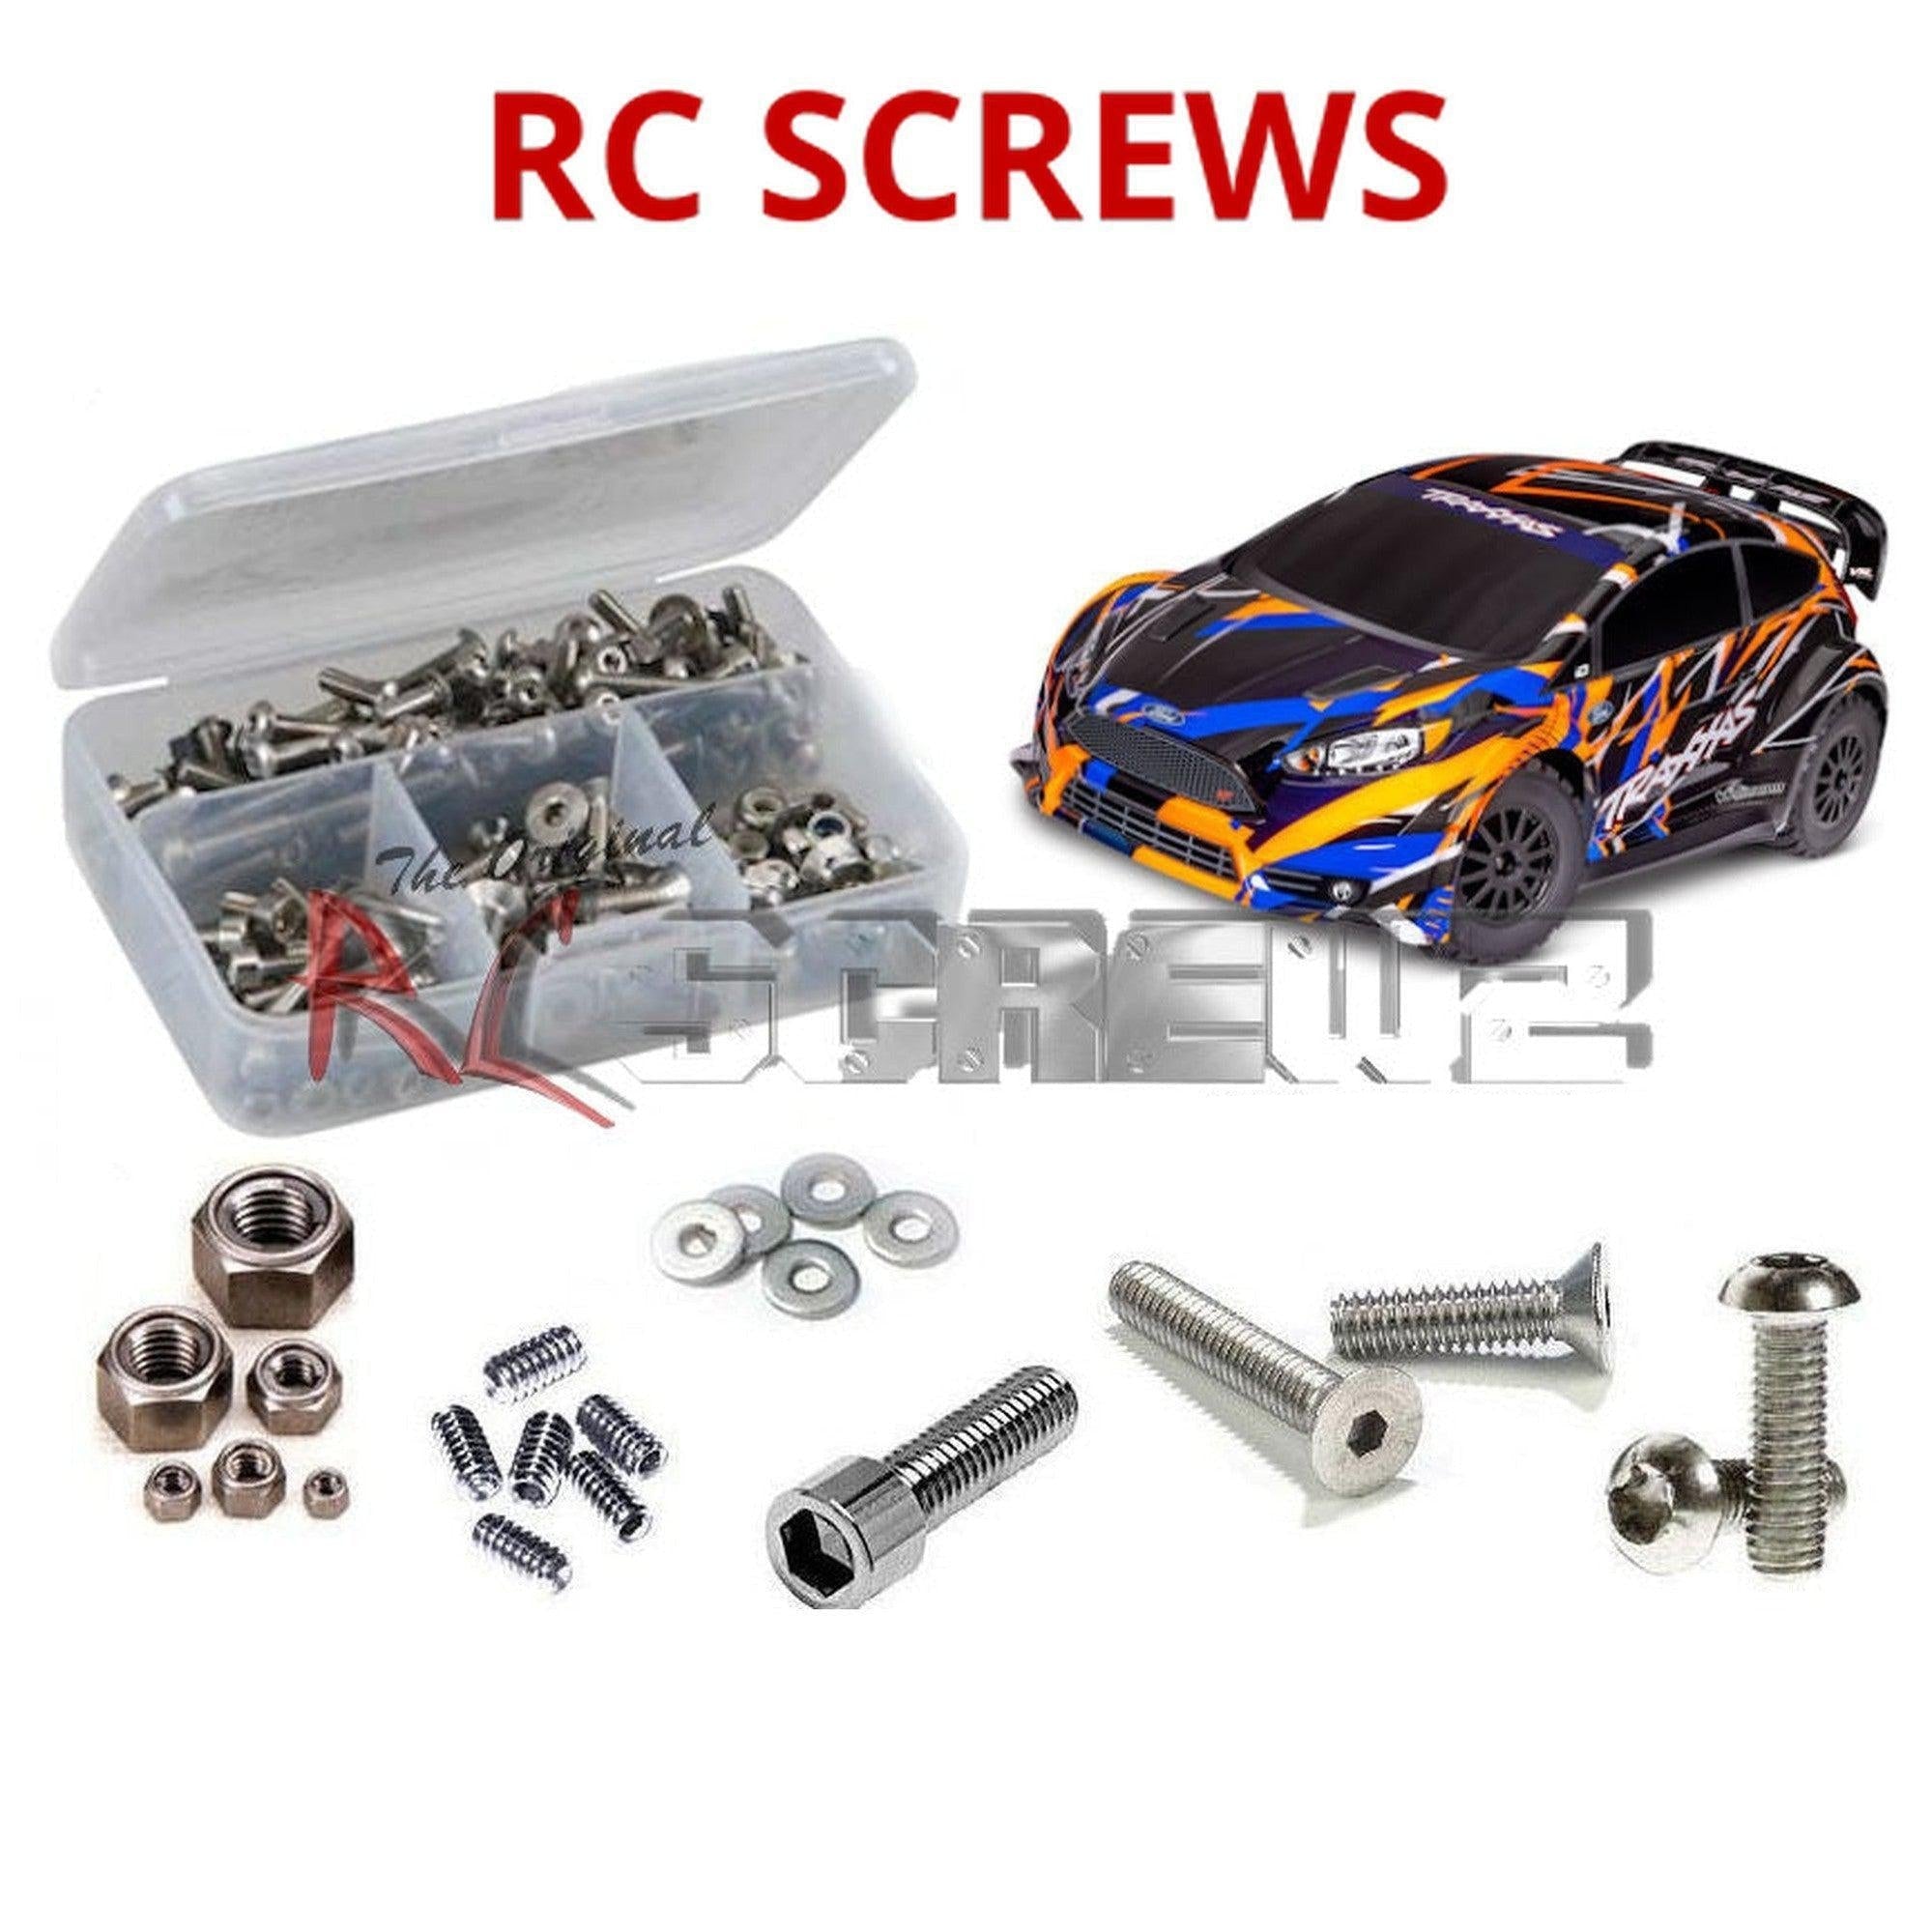 RCScrewZ Stainless Screw Kit tra122 for Traxxas Ford Fiesta ST Rally VXL 74276-4 - Picture 1 of 12